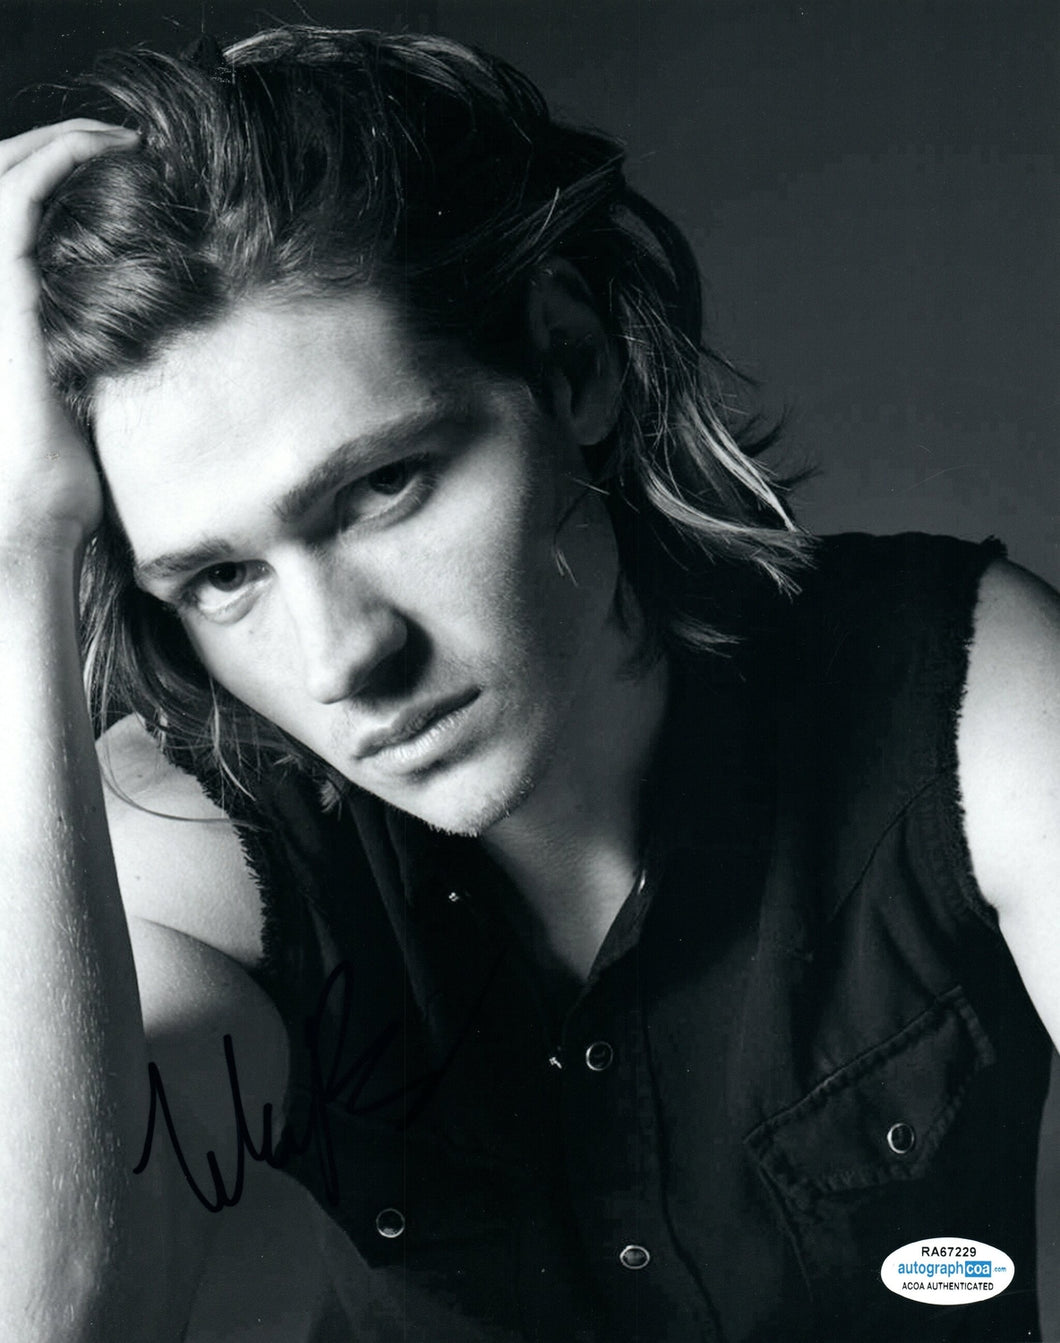 Will Peltz Autographed Signed 8x10 Photo Male Fashion Model Gay Interest